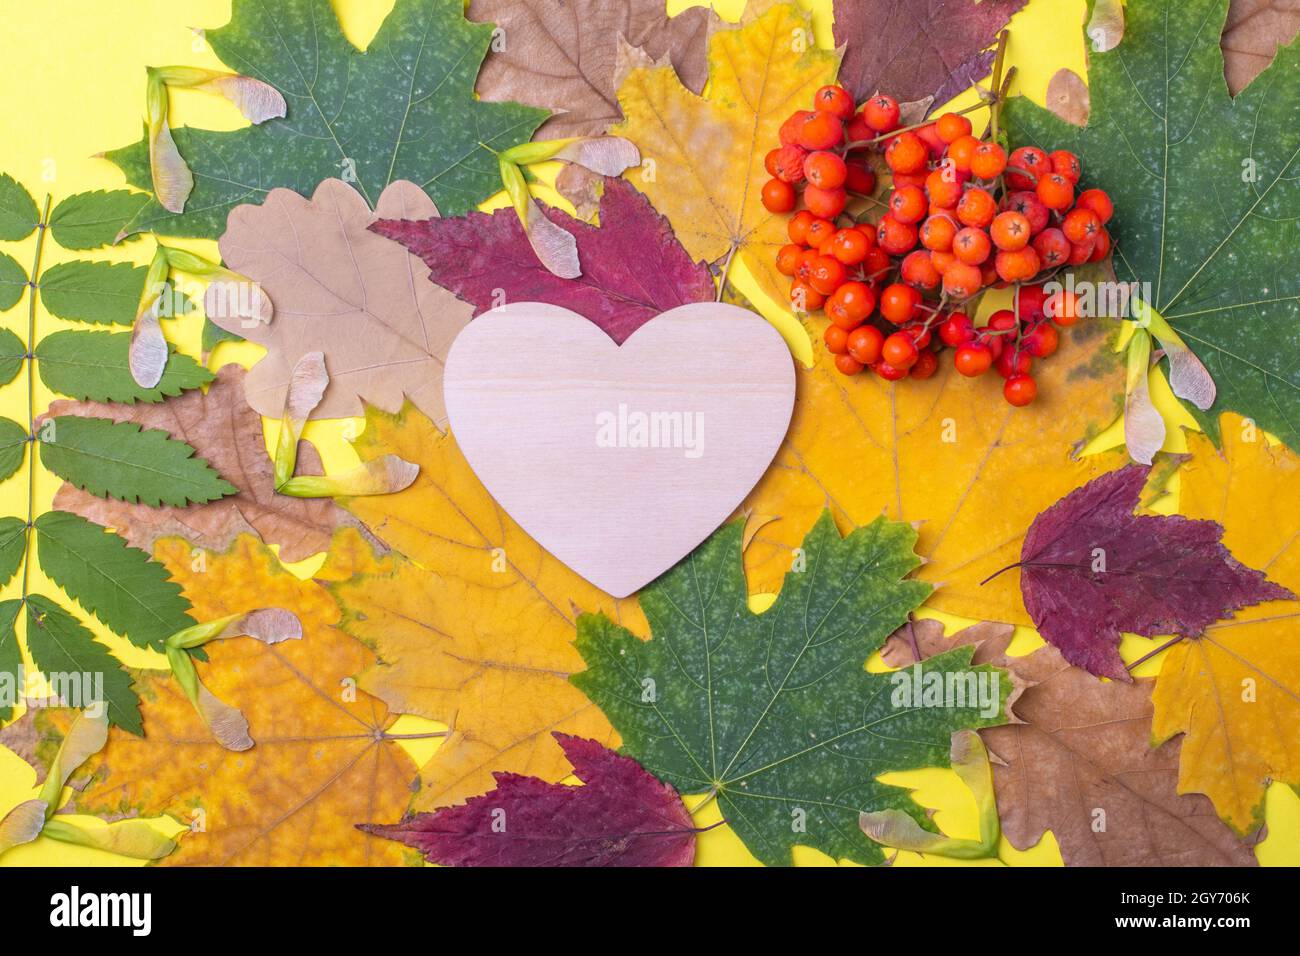 Wooden heart multicolored red, orange, green dry fallen autumn leaves and orange rowan berries on a yellow background. Autumn natural background. Autu Stock Photo